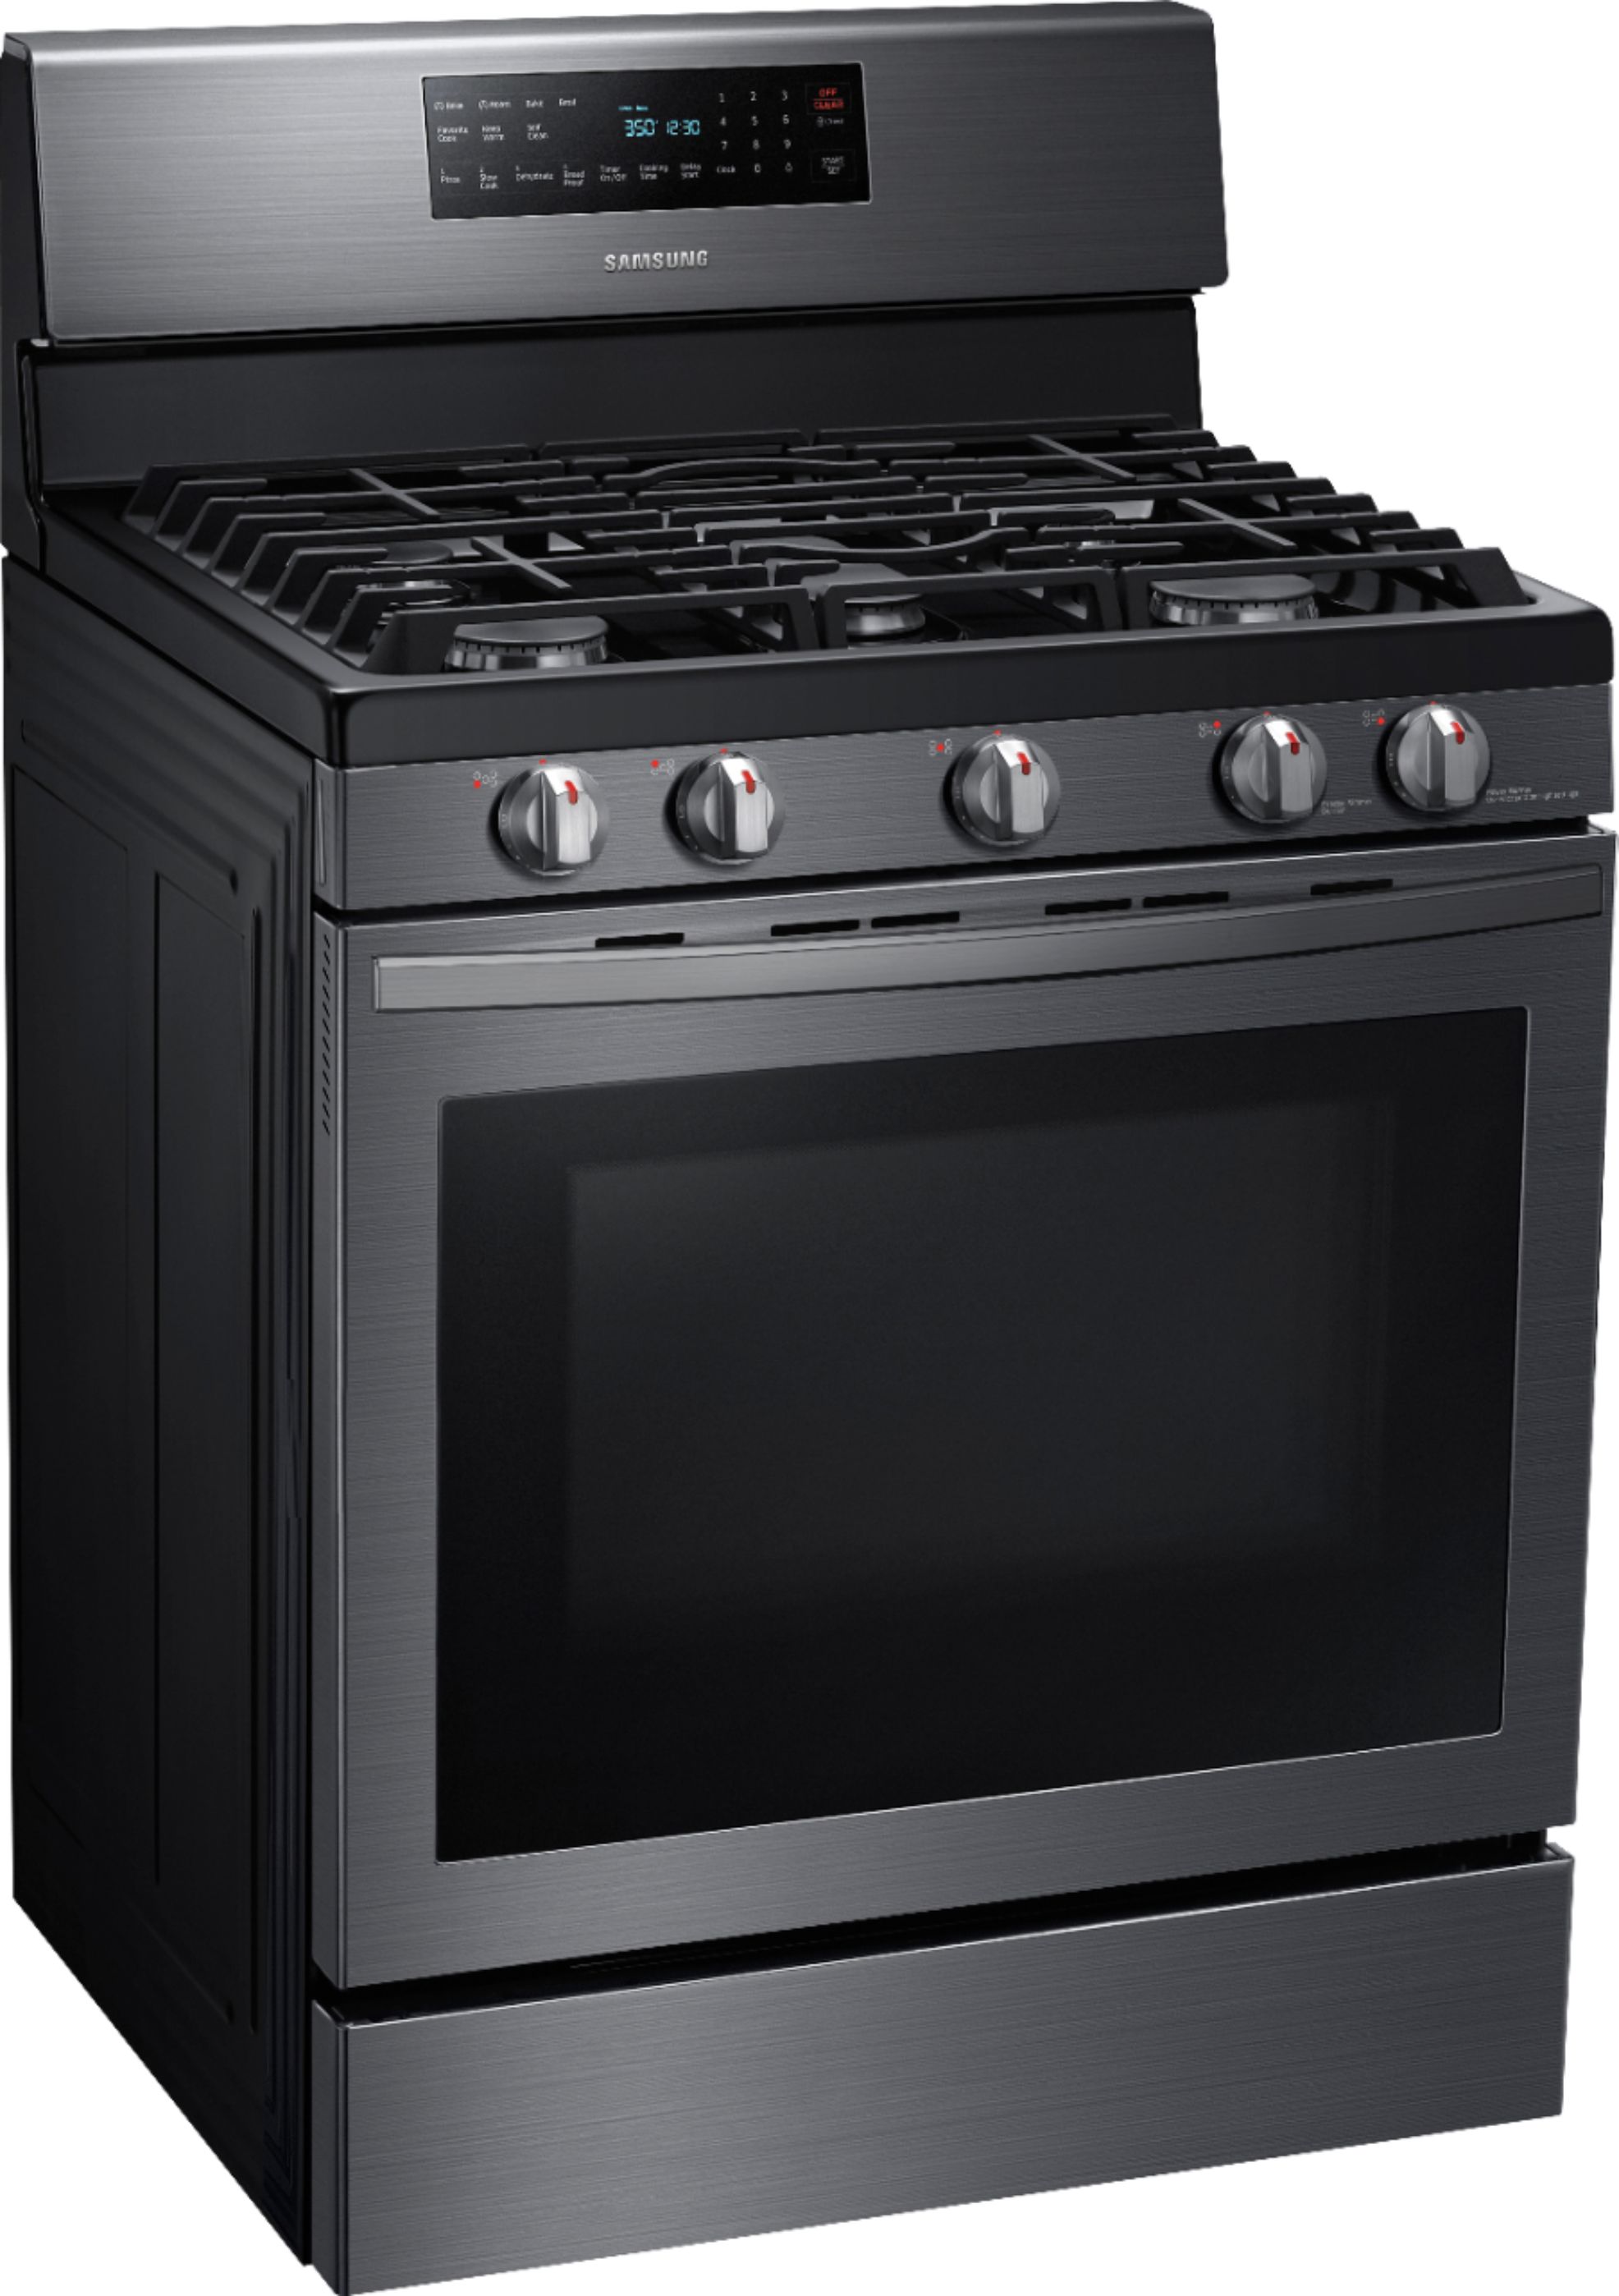 Angle View: Samsung - 5.8 Cu. Ft. Freestanding Gas Convection Range with Self-High Heat Cleaning - Black Stainless Steel